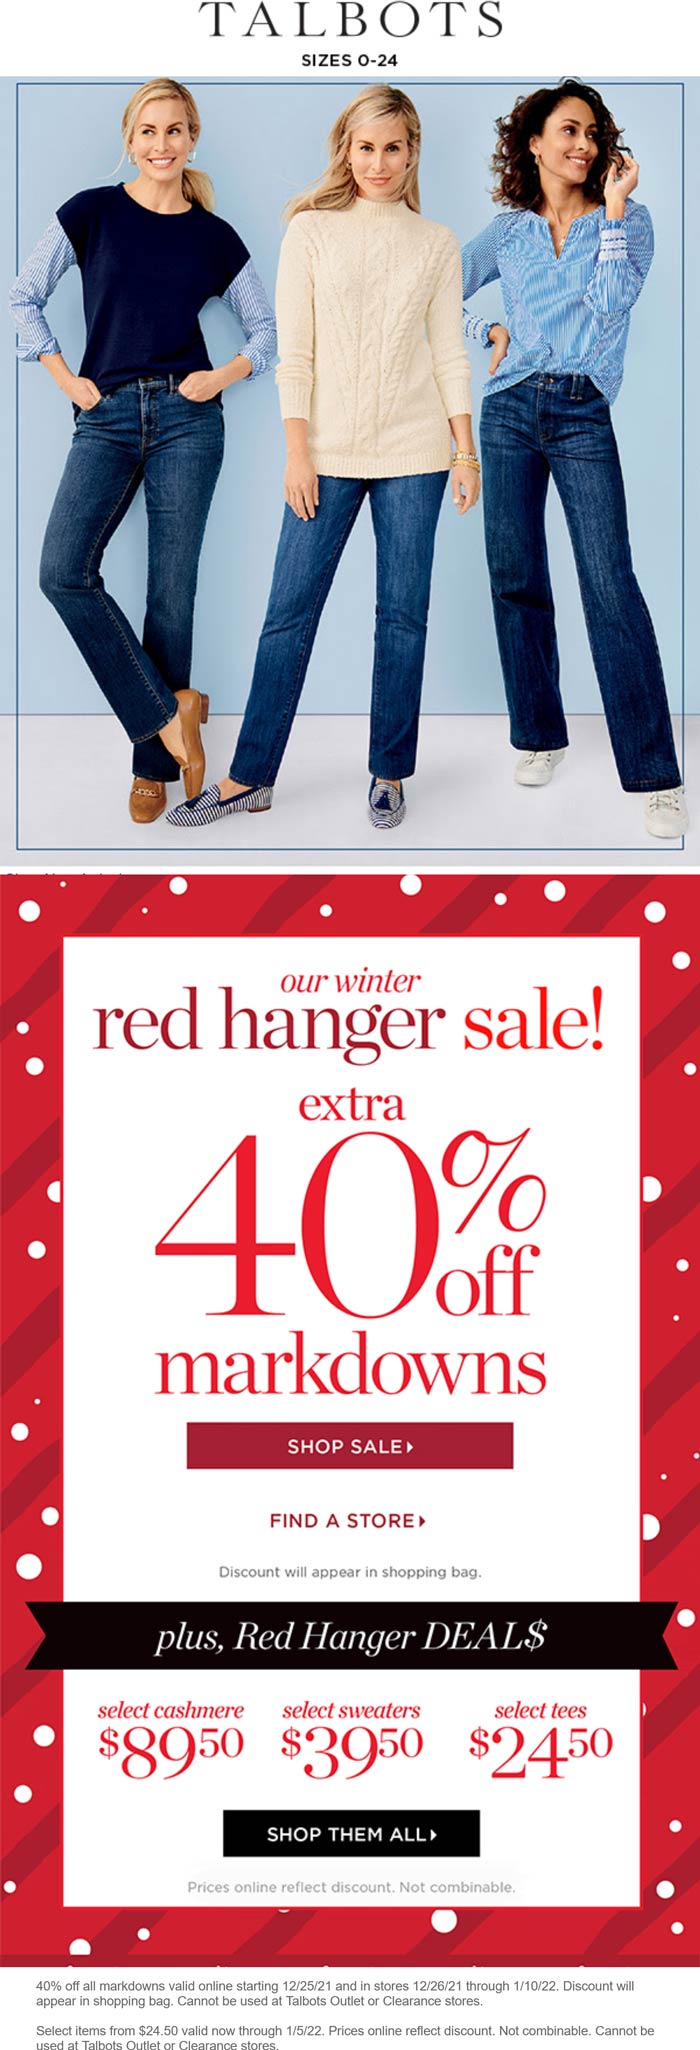 Talbots stores Coupon  40% off markdowns at Talbots, ditto online #talbots 